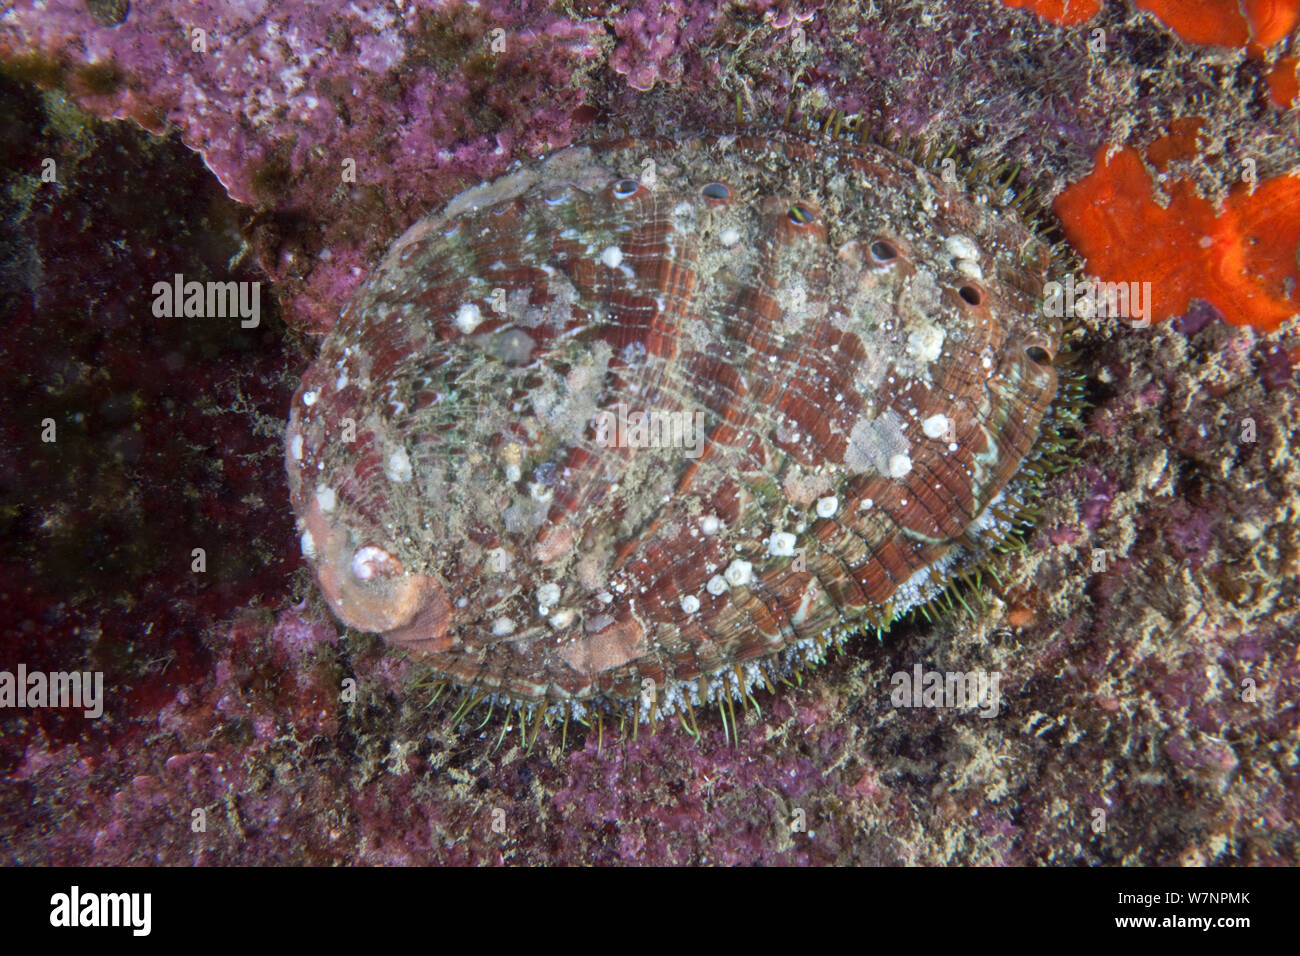 Ormer (Haliotis tuberculata) English Channel, off the coast of Sark, Channel islands, July Stock Photo